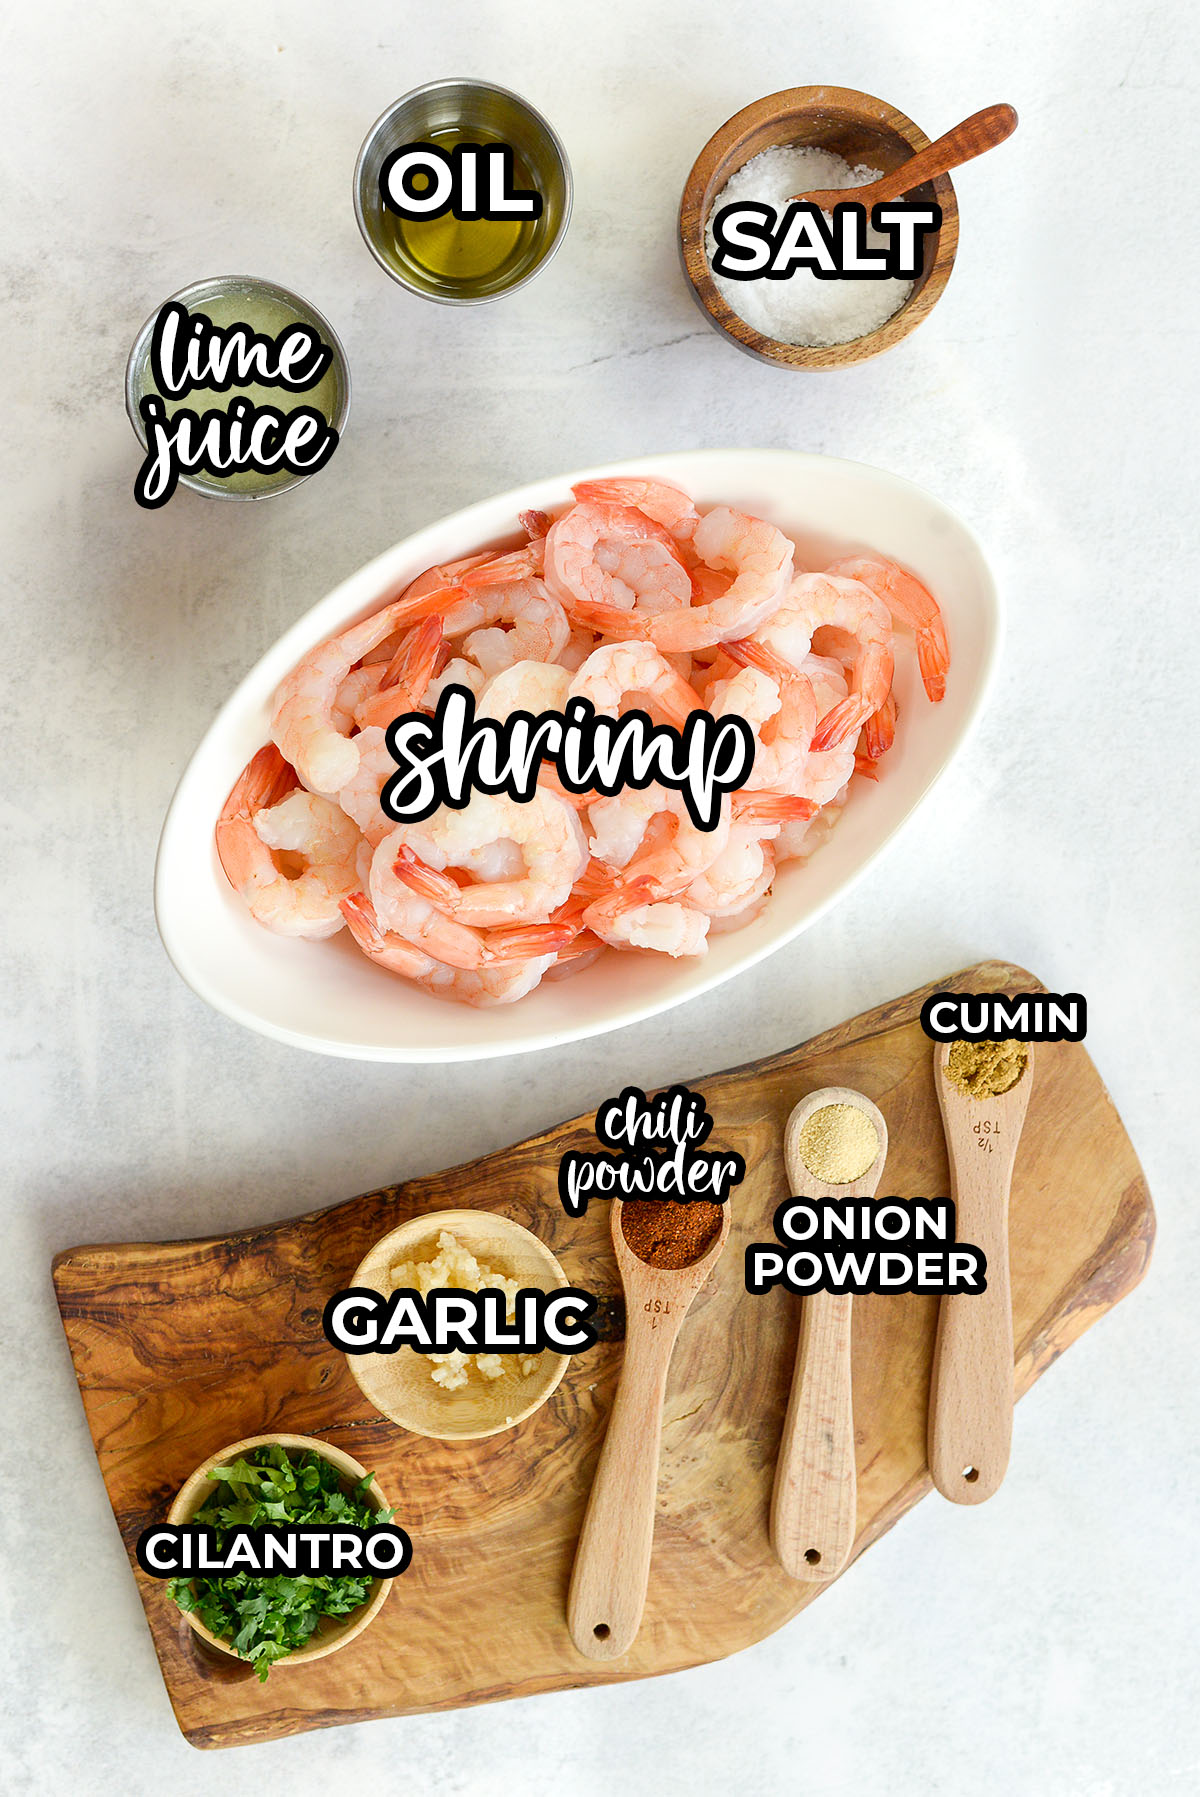 Chili lime shrimp ingredients spread out on a countertop.